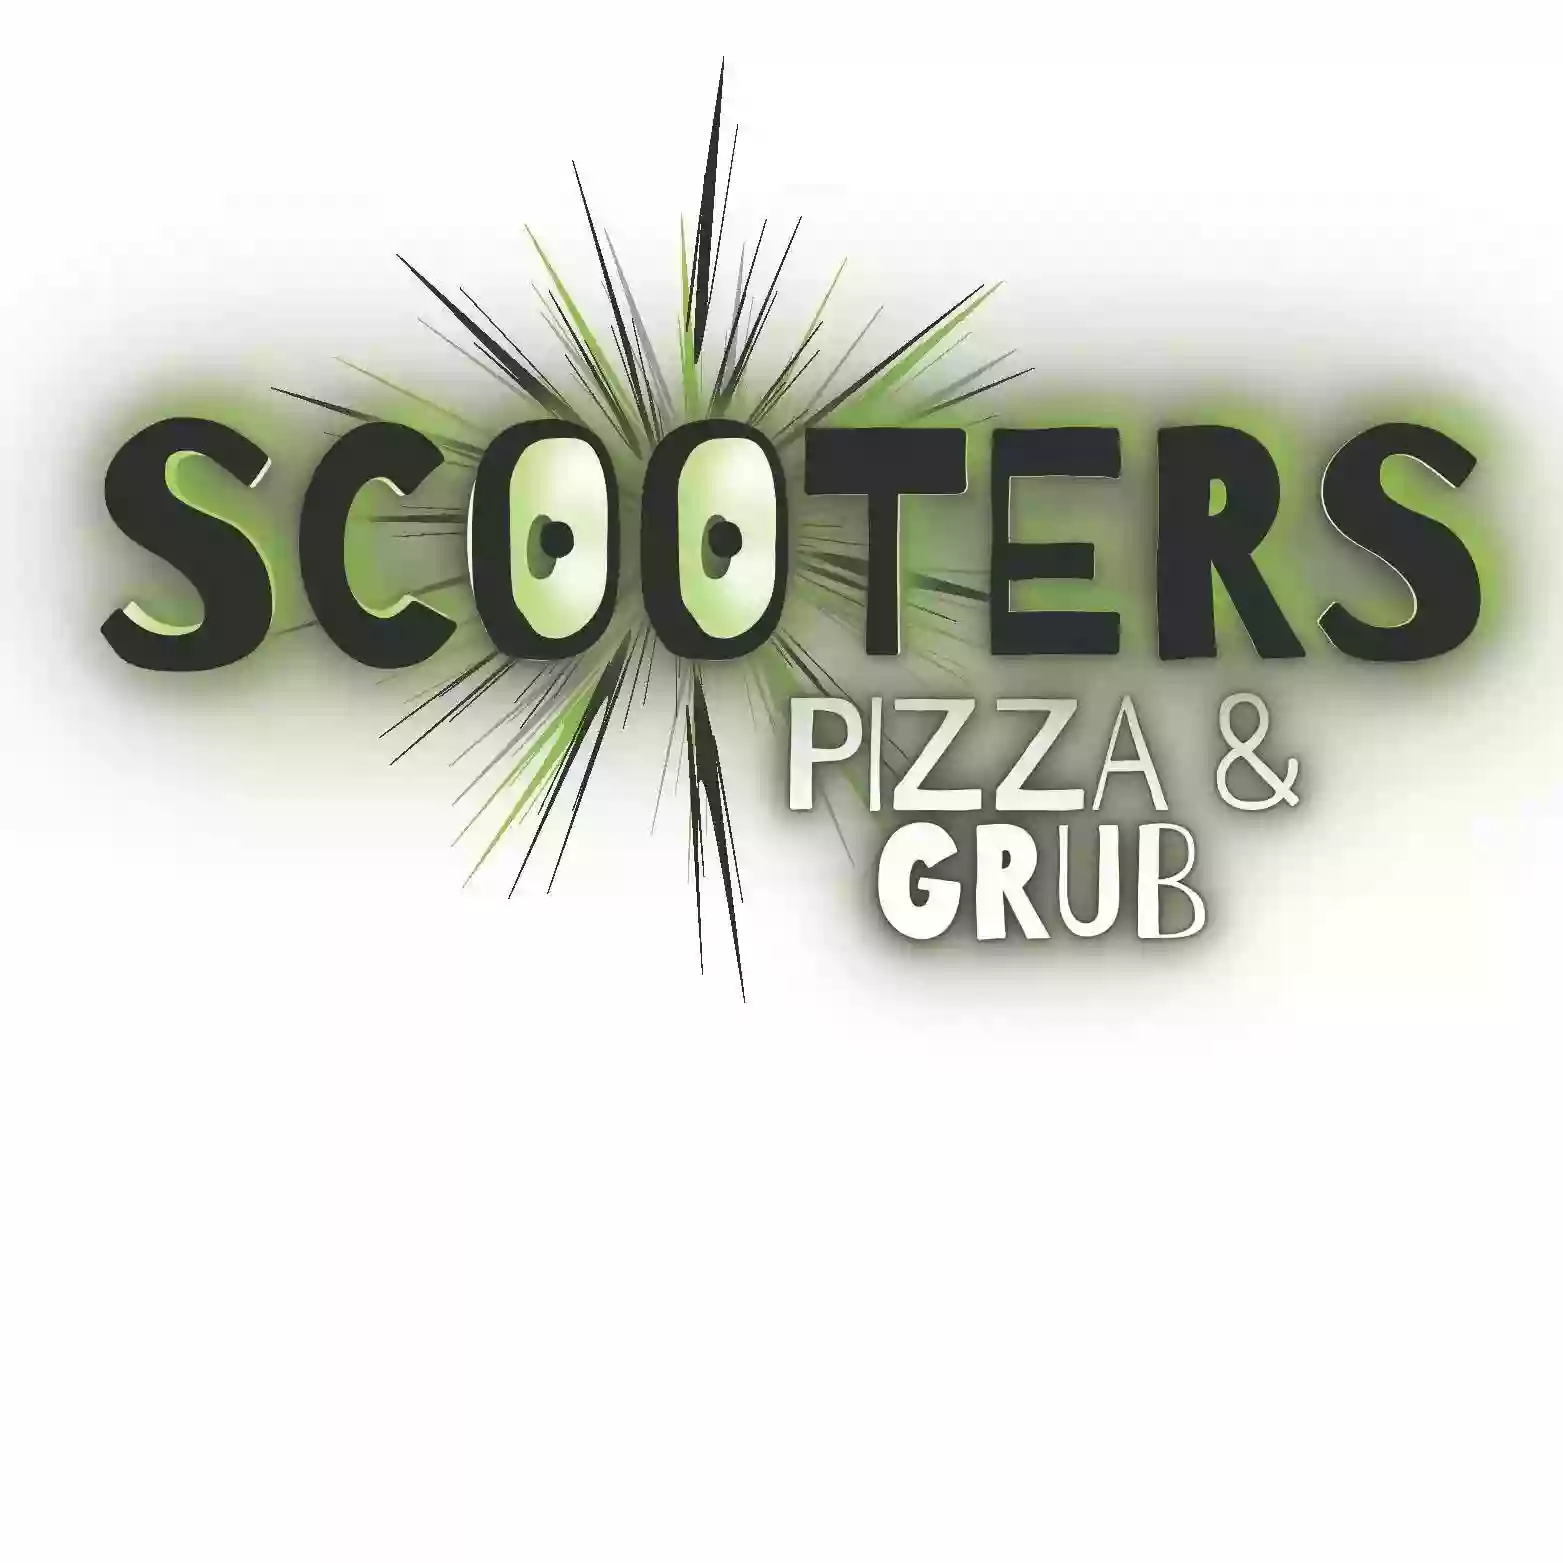 Scooters Pizza & Grub